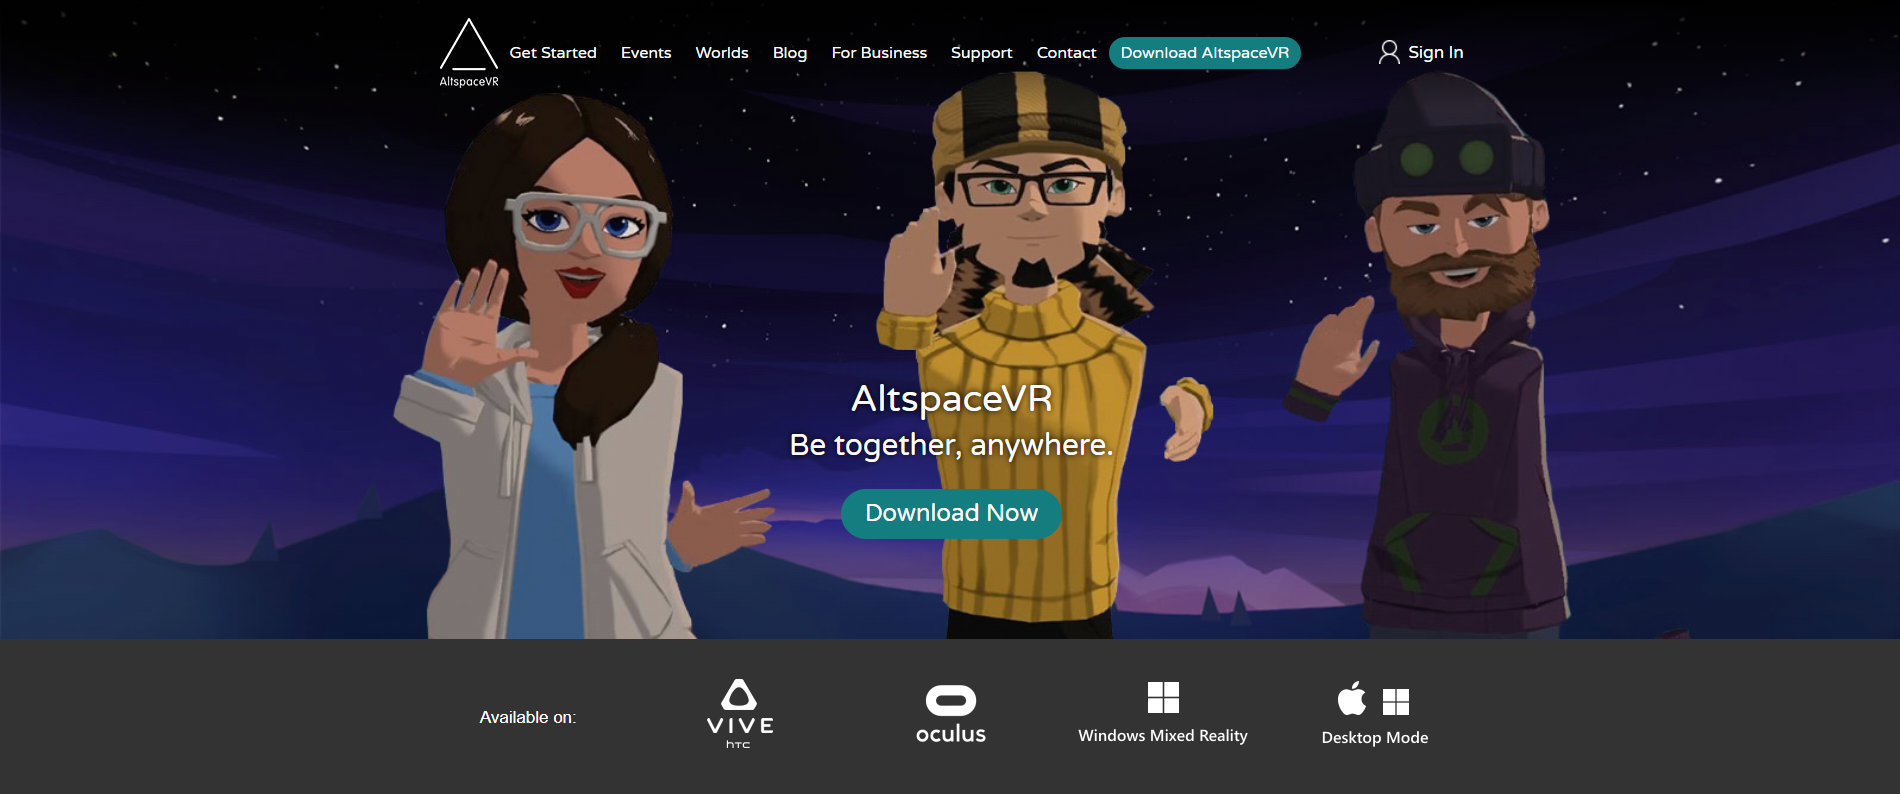 Download and install AltspaceVR